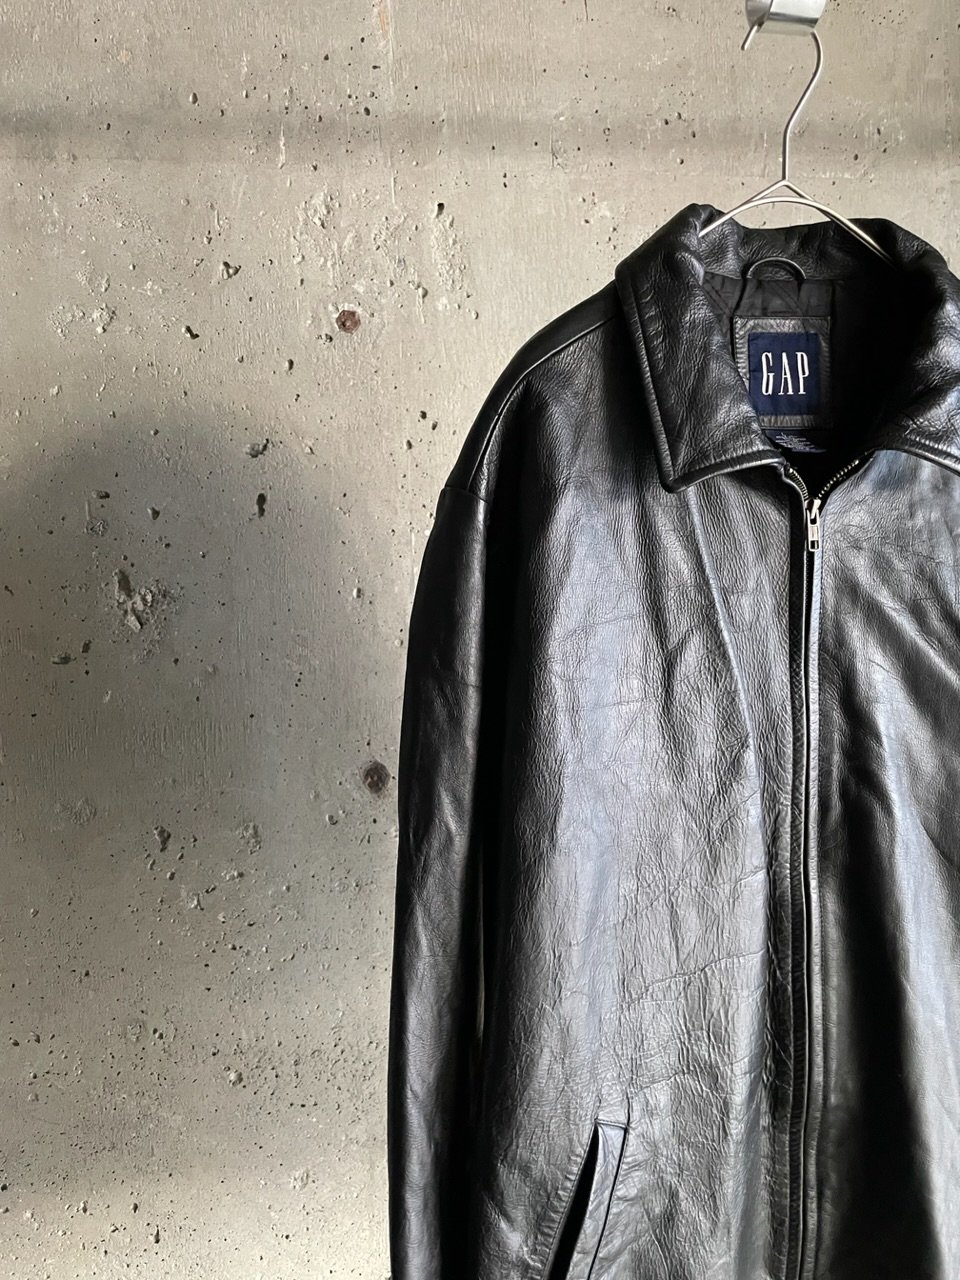 90s GAP leather zip up jacket | sui & shara